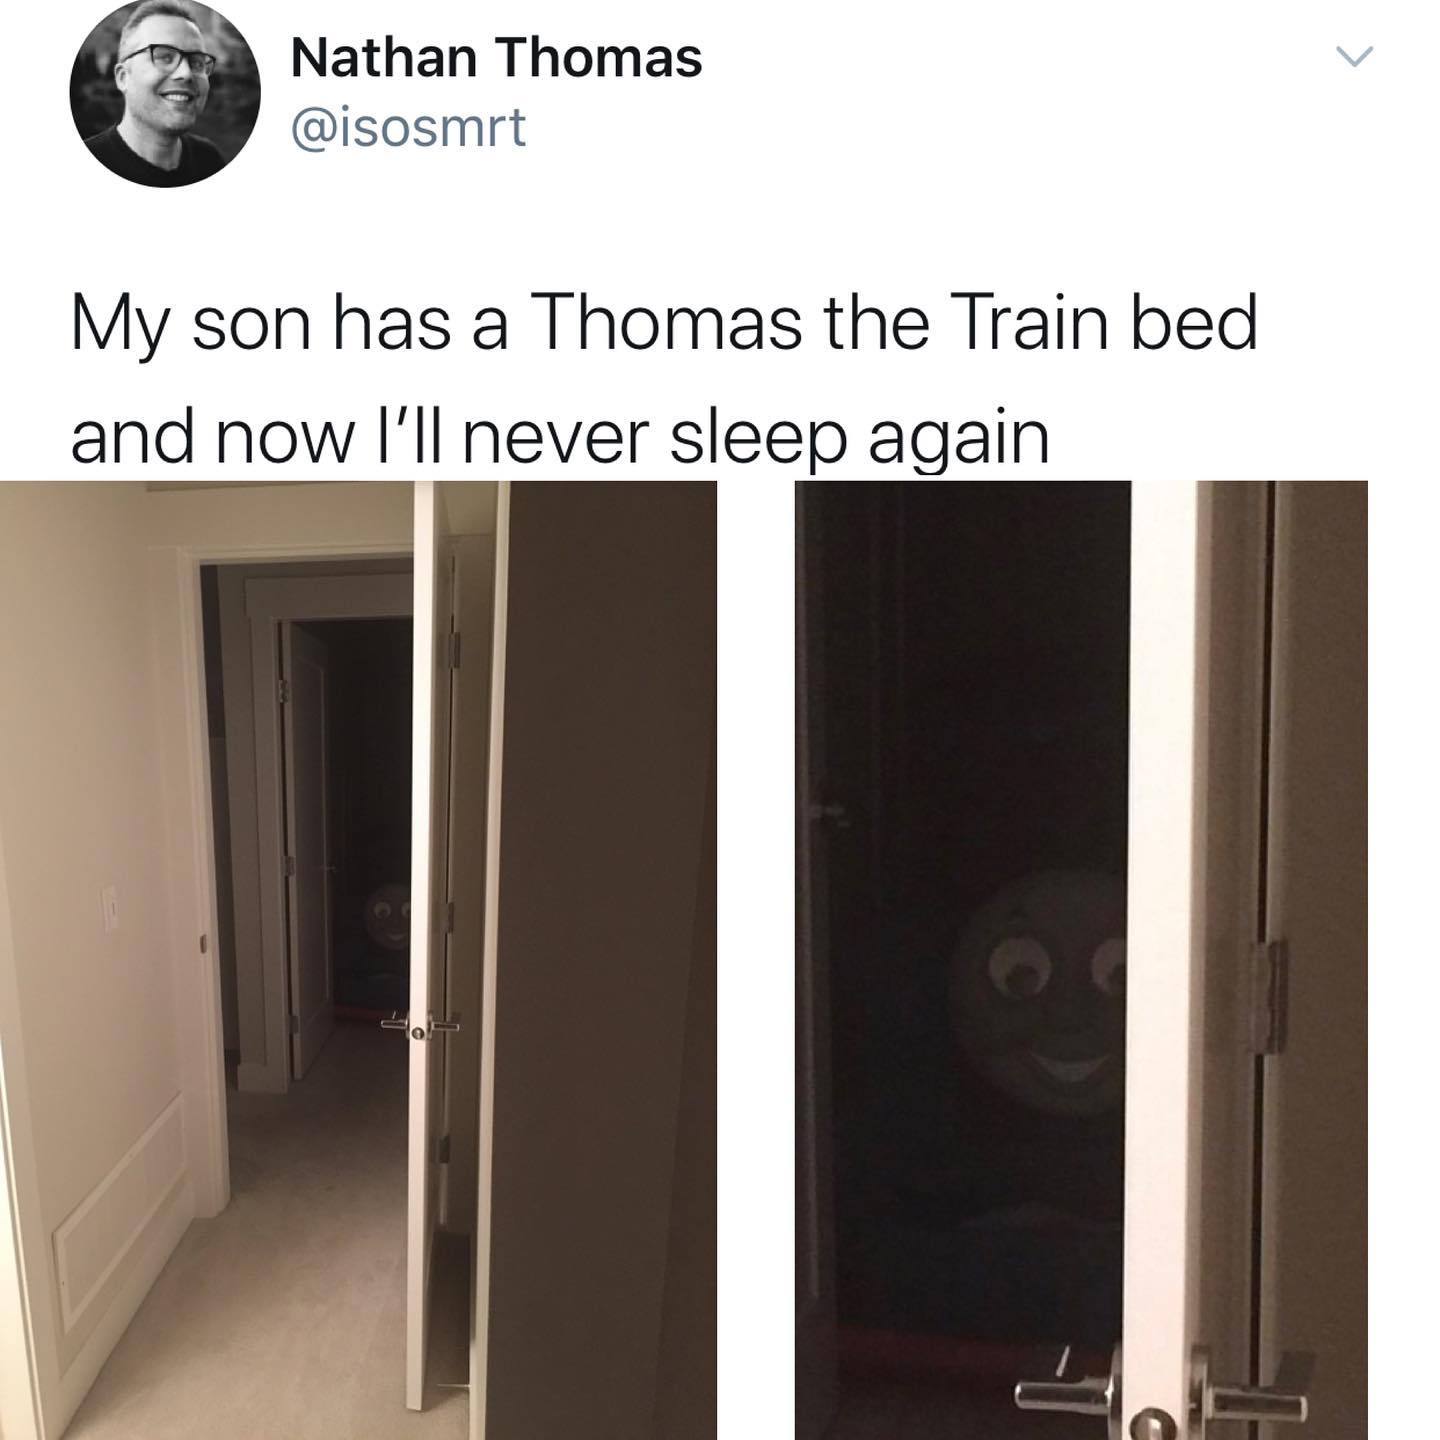 dank memes - twitter - Step2 Thomas the Tank Engine Toddler Bed - Nathan Thomas My son has a Thomas the Train bed and now I'll never sleep again